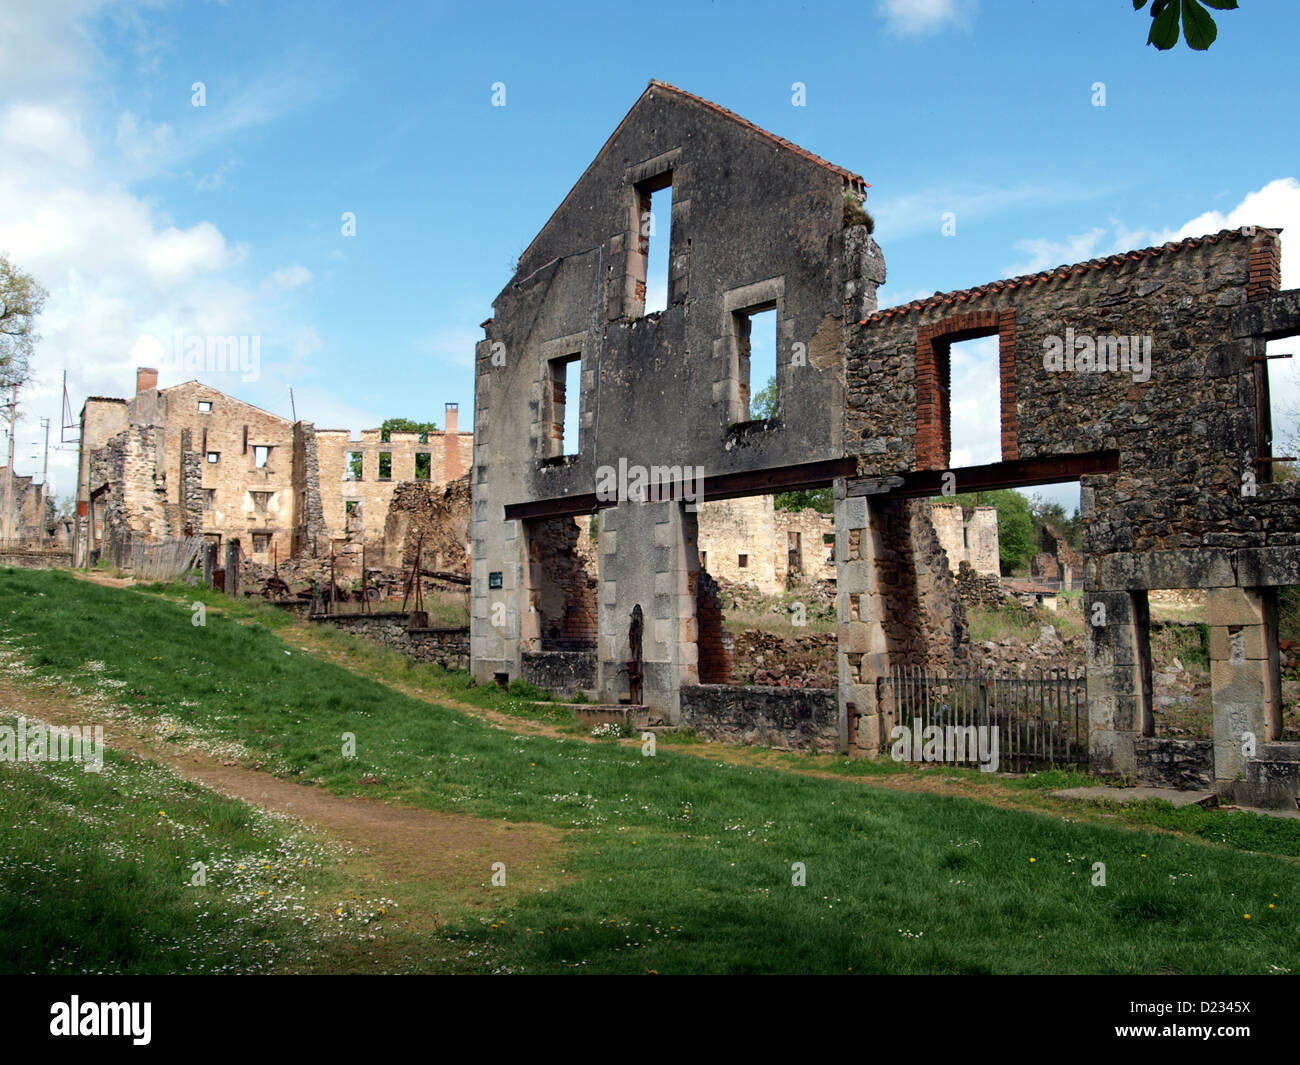 The SS Panzer Division Das Reich, destroyed the French village of Oradour-sur-Glane during WWII and today it is preserved In a Ruined State Stock Photo